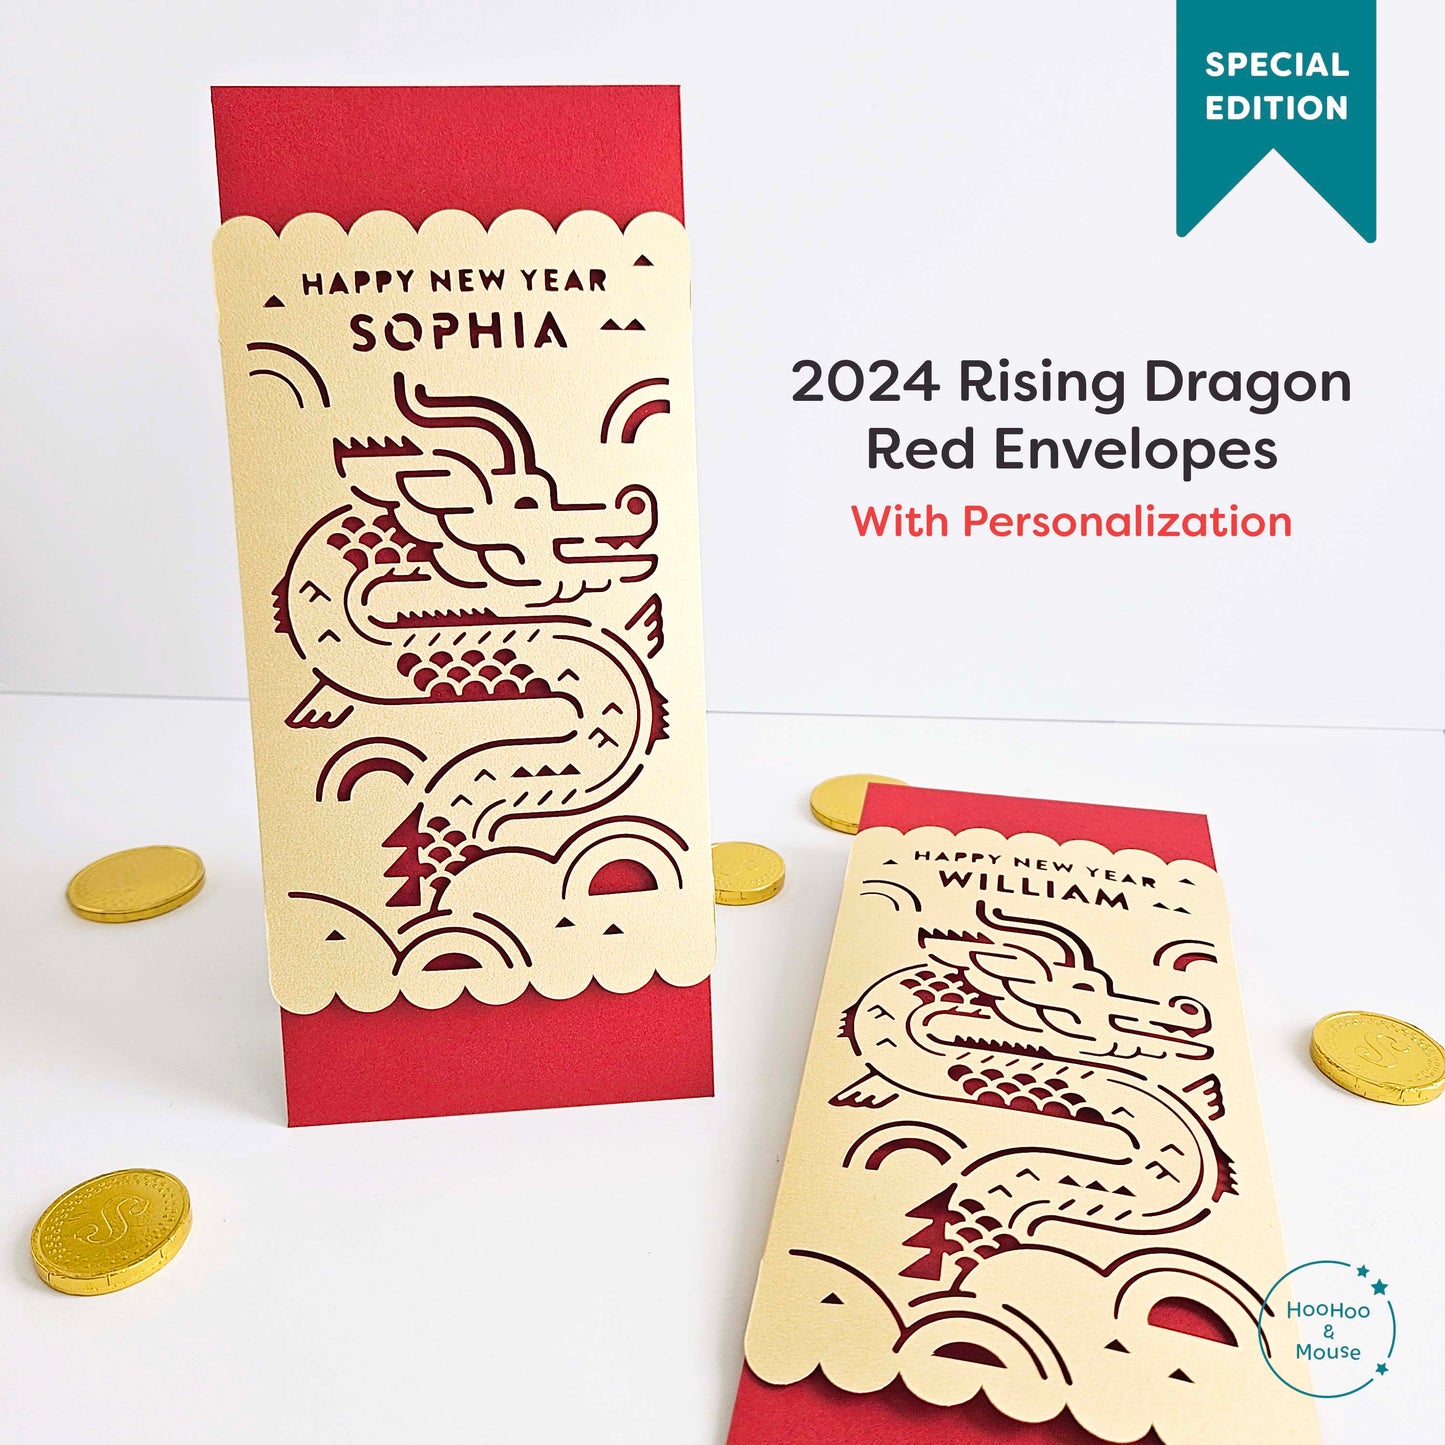 2024 Deluxe Dragon Red Envelope, personalized